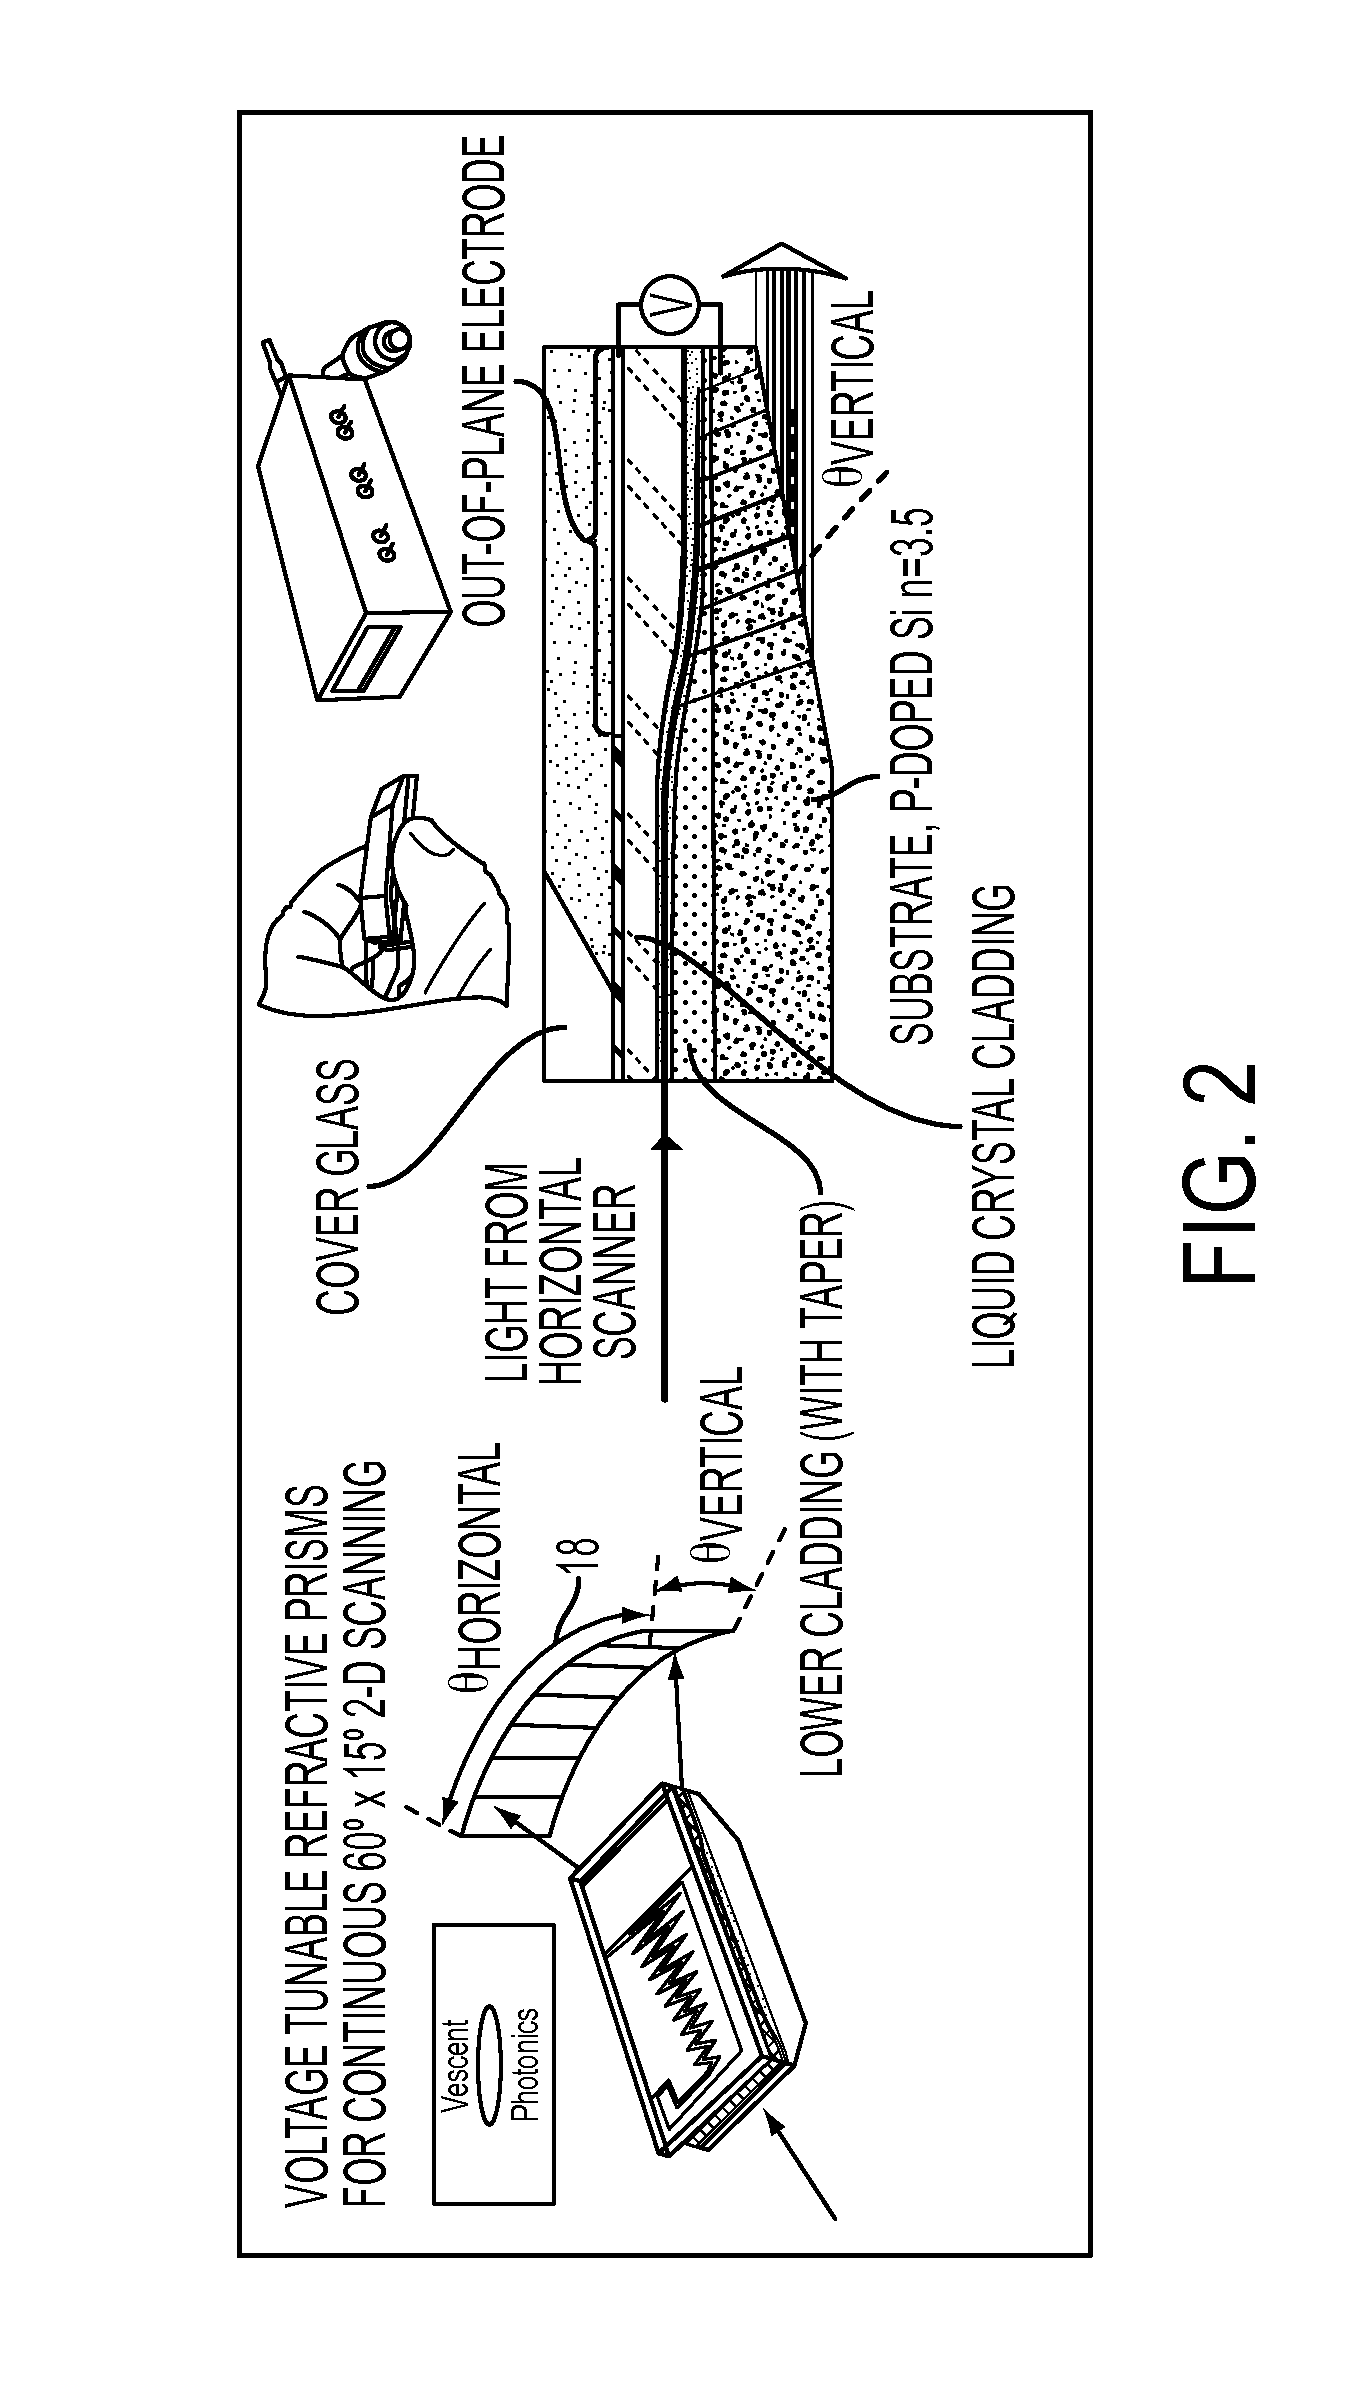 Non-mechanical beam steering tracking system